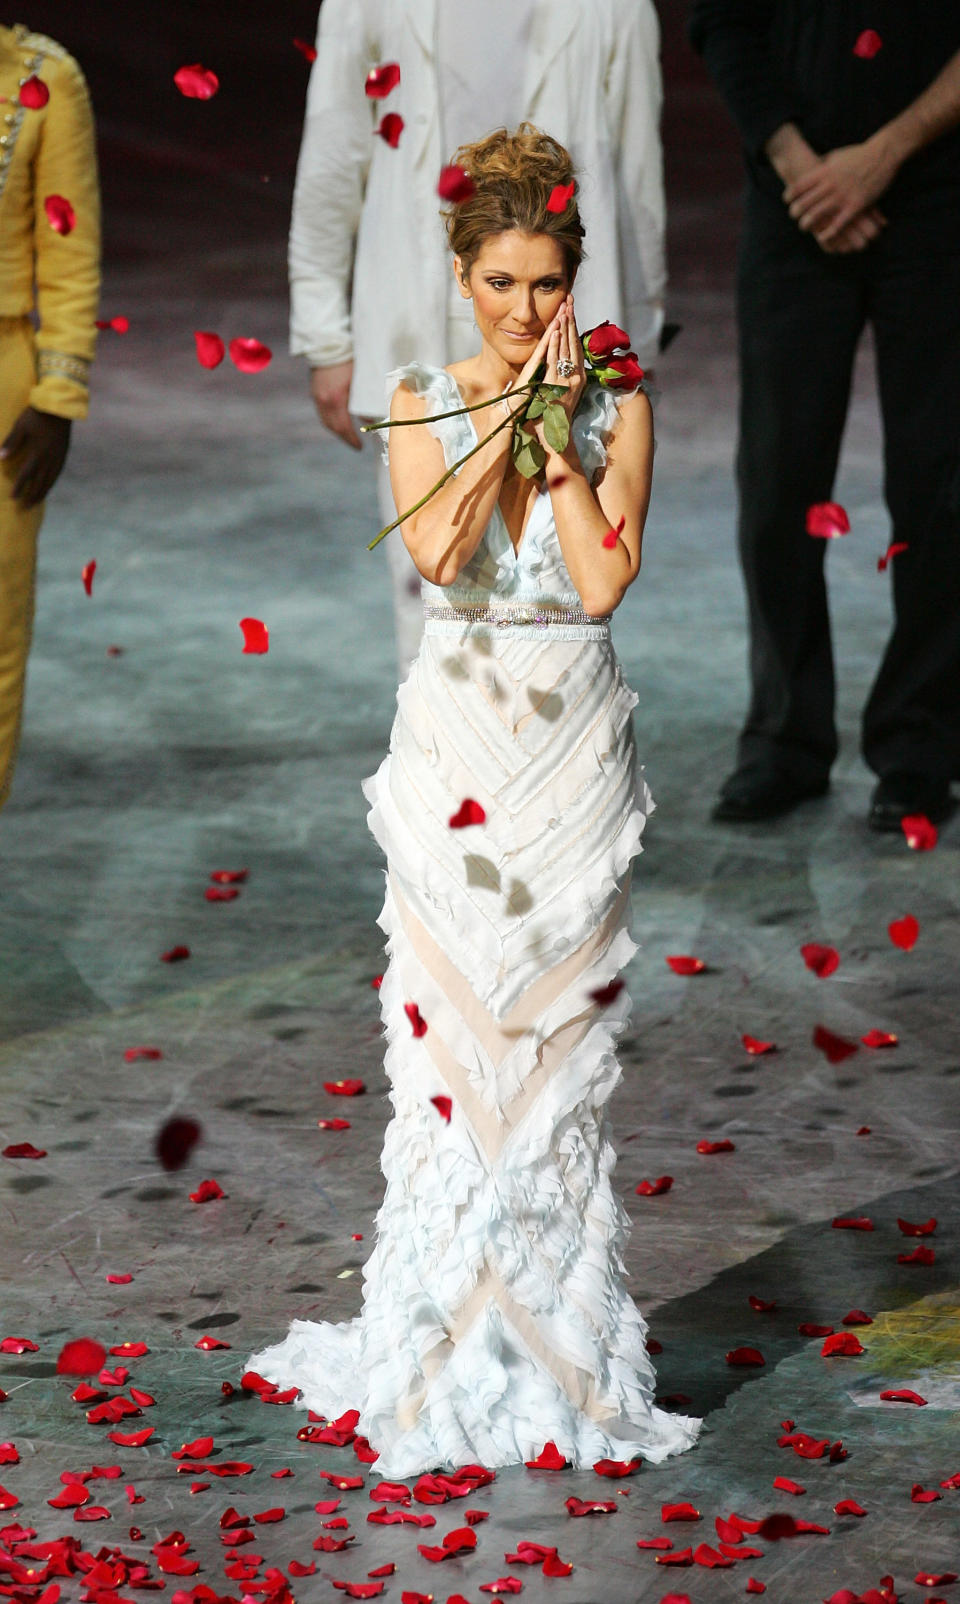 LAS VEGAS - DECEMBER 15:  Rose petals fall around singer Celine Dion after the last performance of her show 'A New Day...' at The Colosseum at Caesars Palace December 15, 2007 in Las Vegas, Nevada. Almost three million people watched Dion perform 717 shows since it opened in March 2003.  (Photo by Ethan Miller/Getty Images for AEG Live/Concerts West)